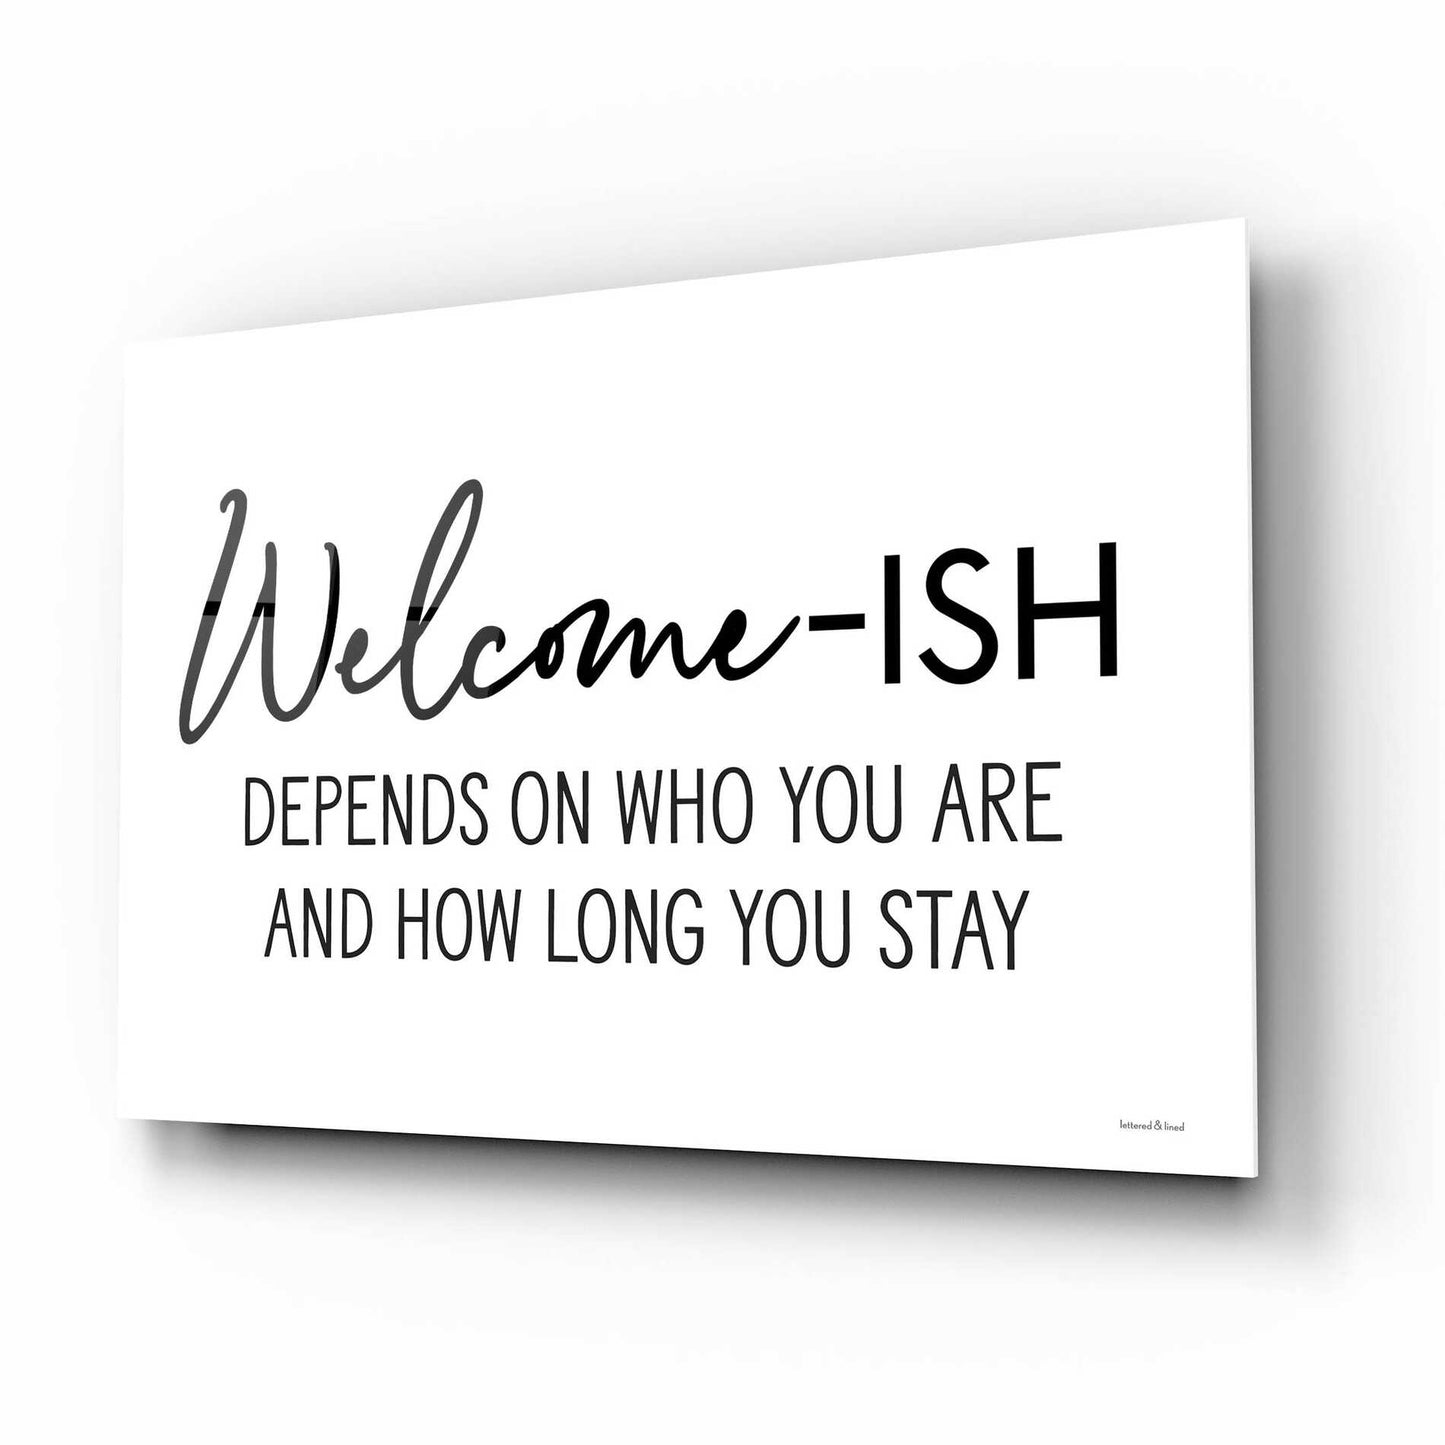 Epic Art 'Welcome-ish' by lettered & lined, Acrylic Glass Wall Art,16x12